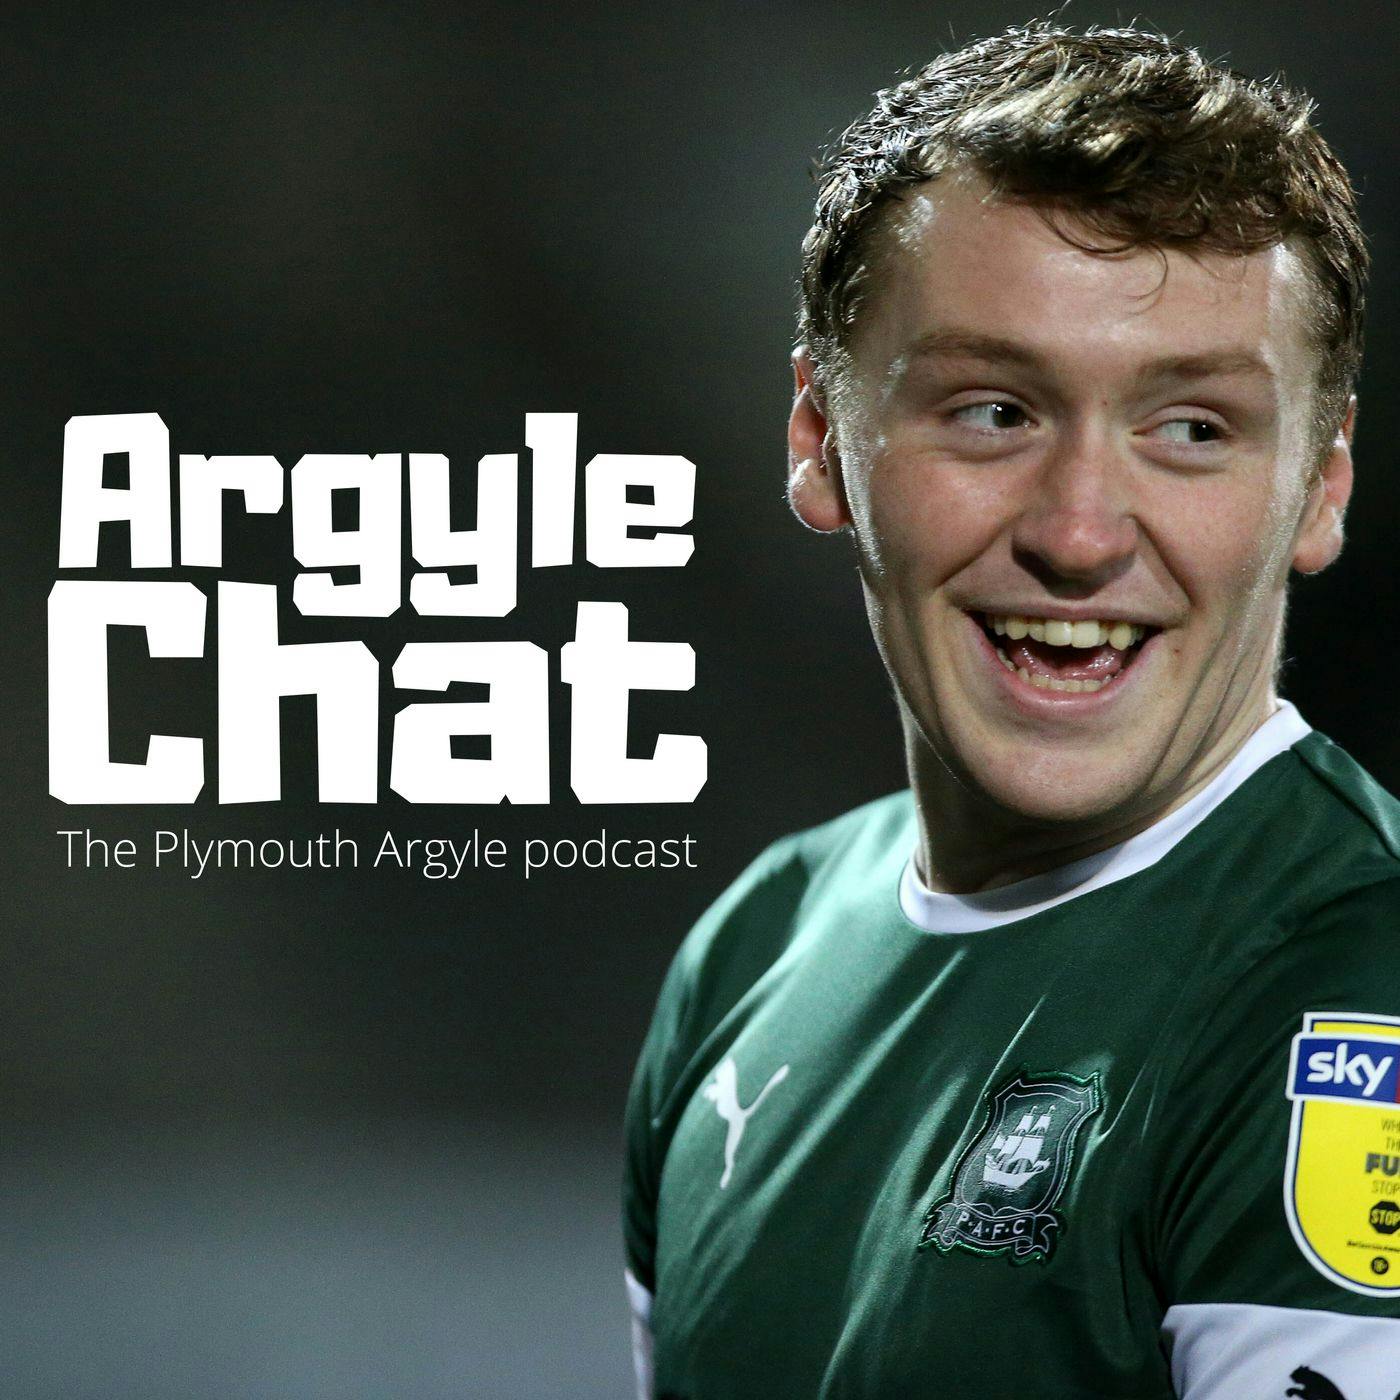 A happy Christmas and a potentially great new year for Argyle